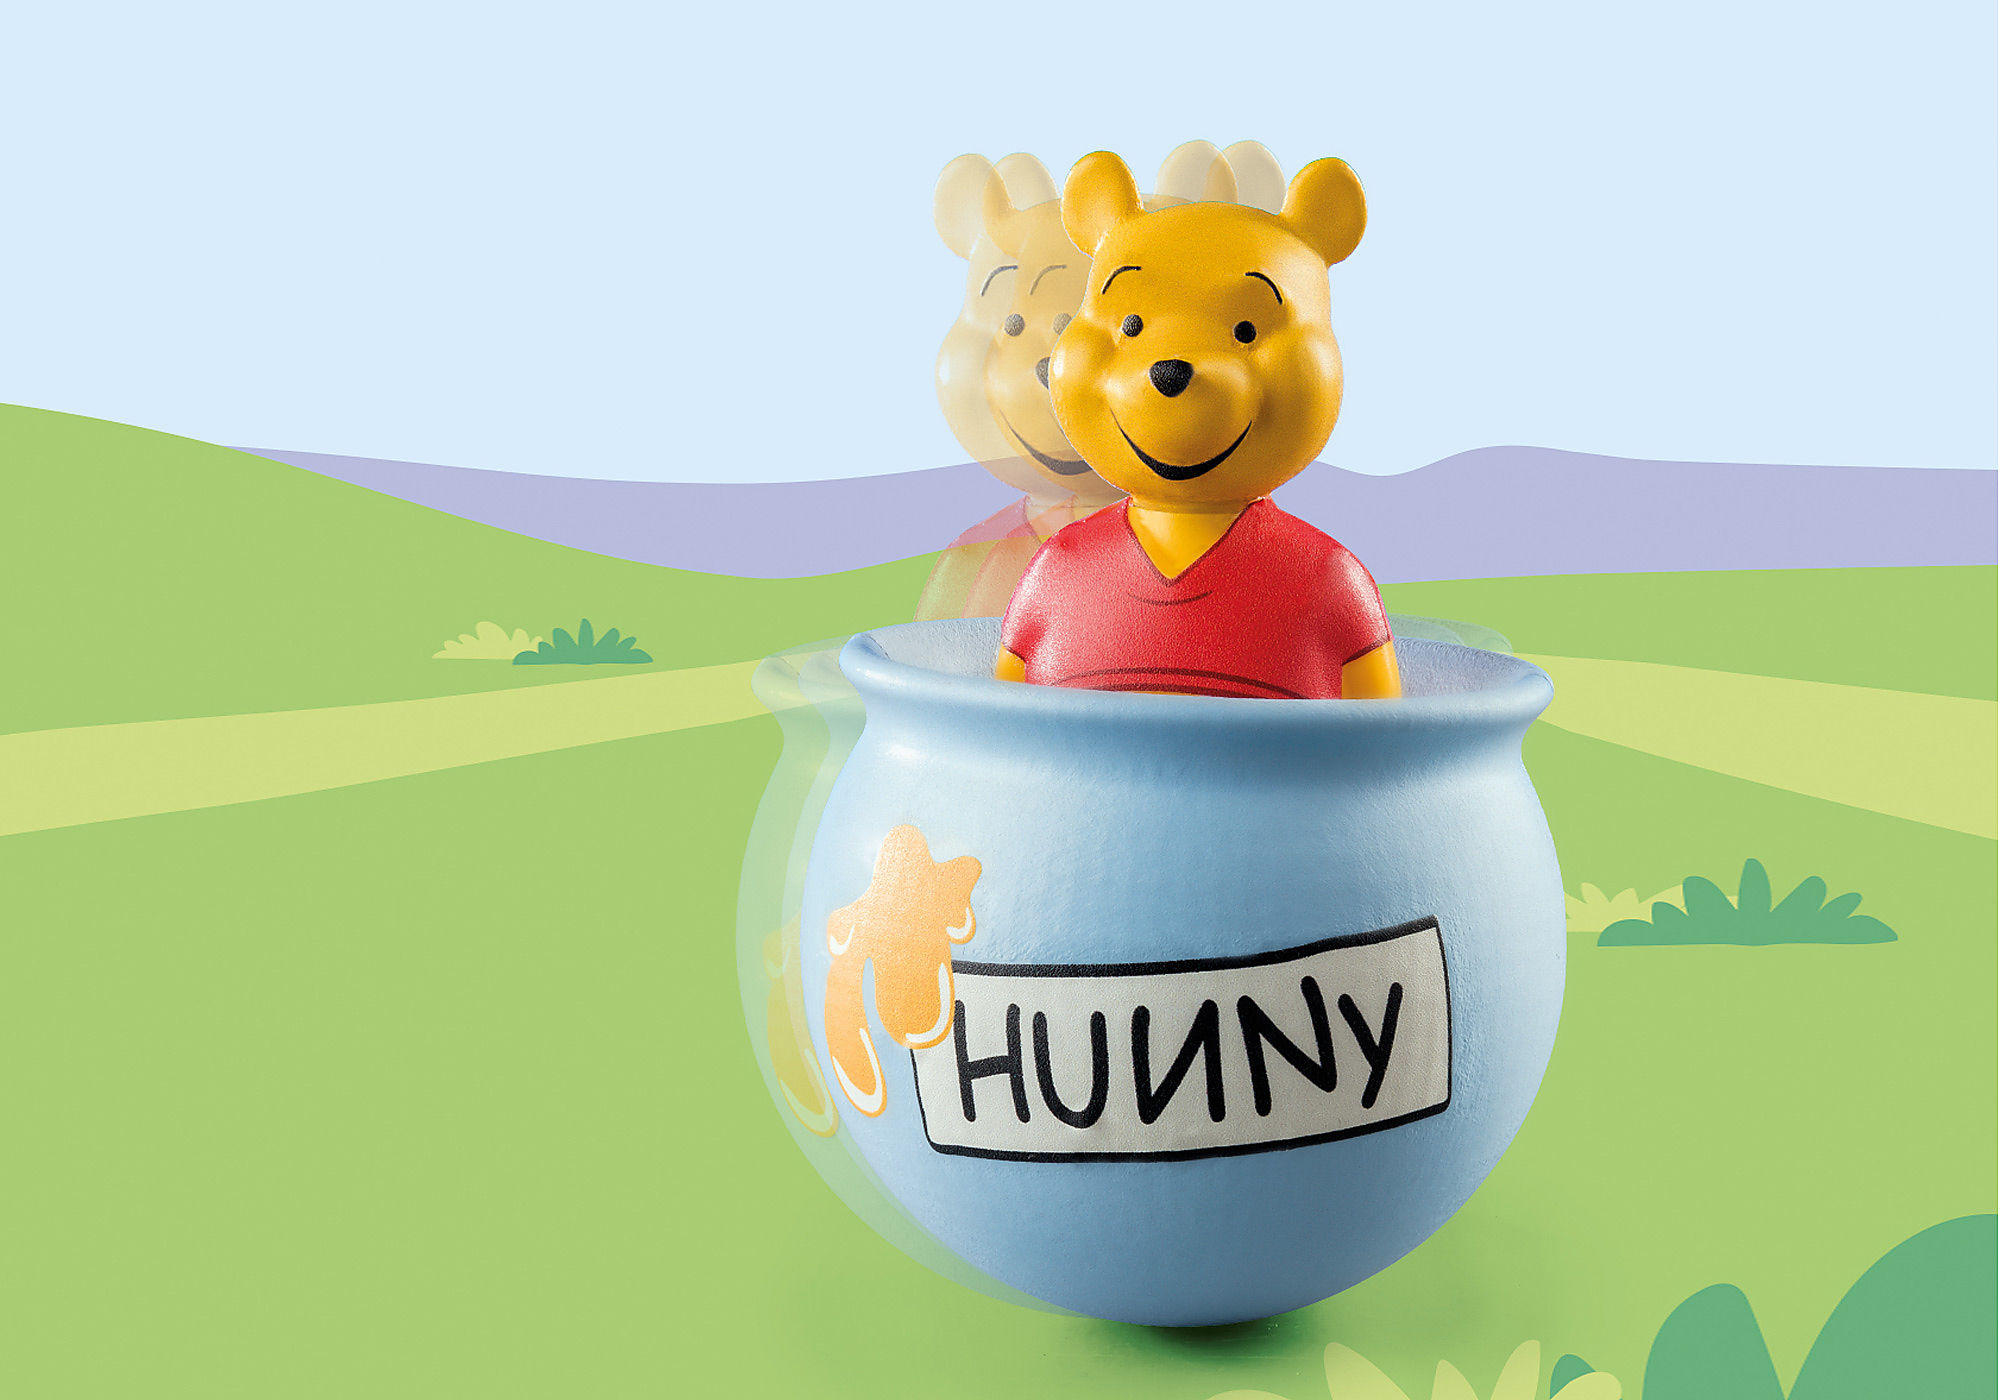 Winnie the Pooh and Honey Pot Coin Bank